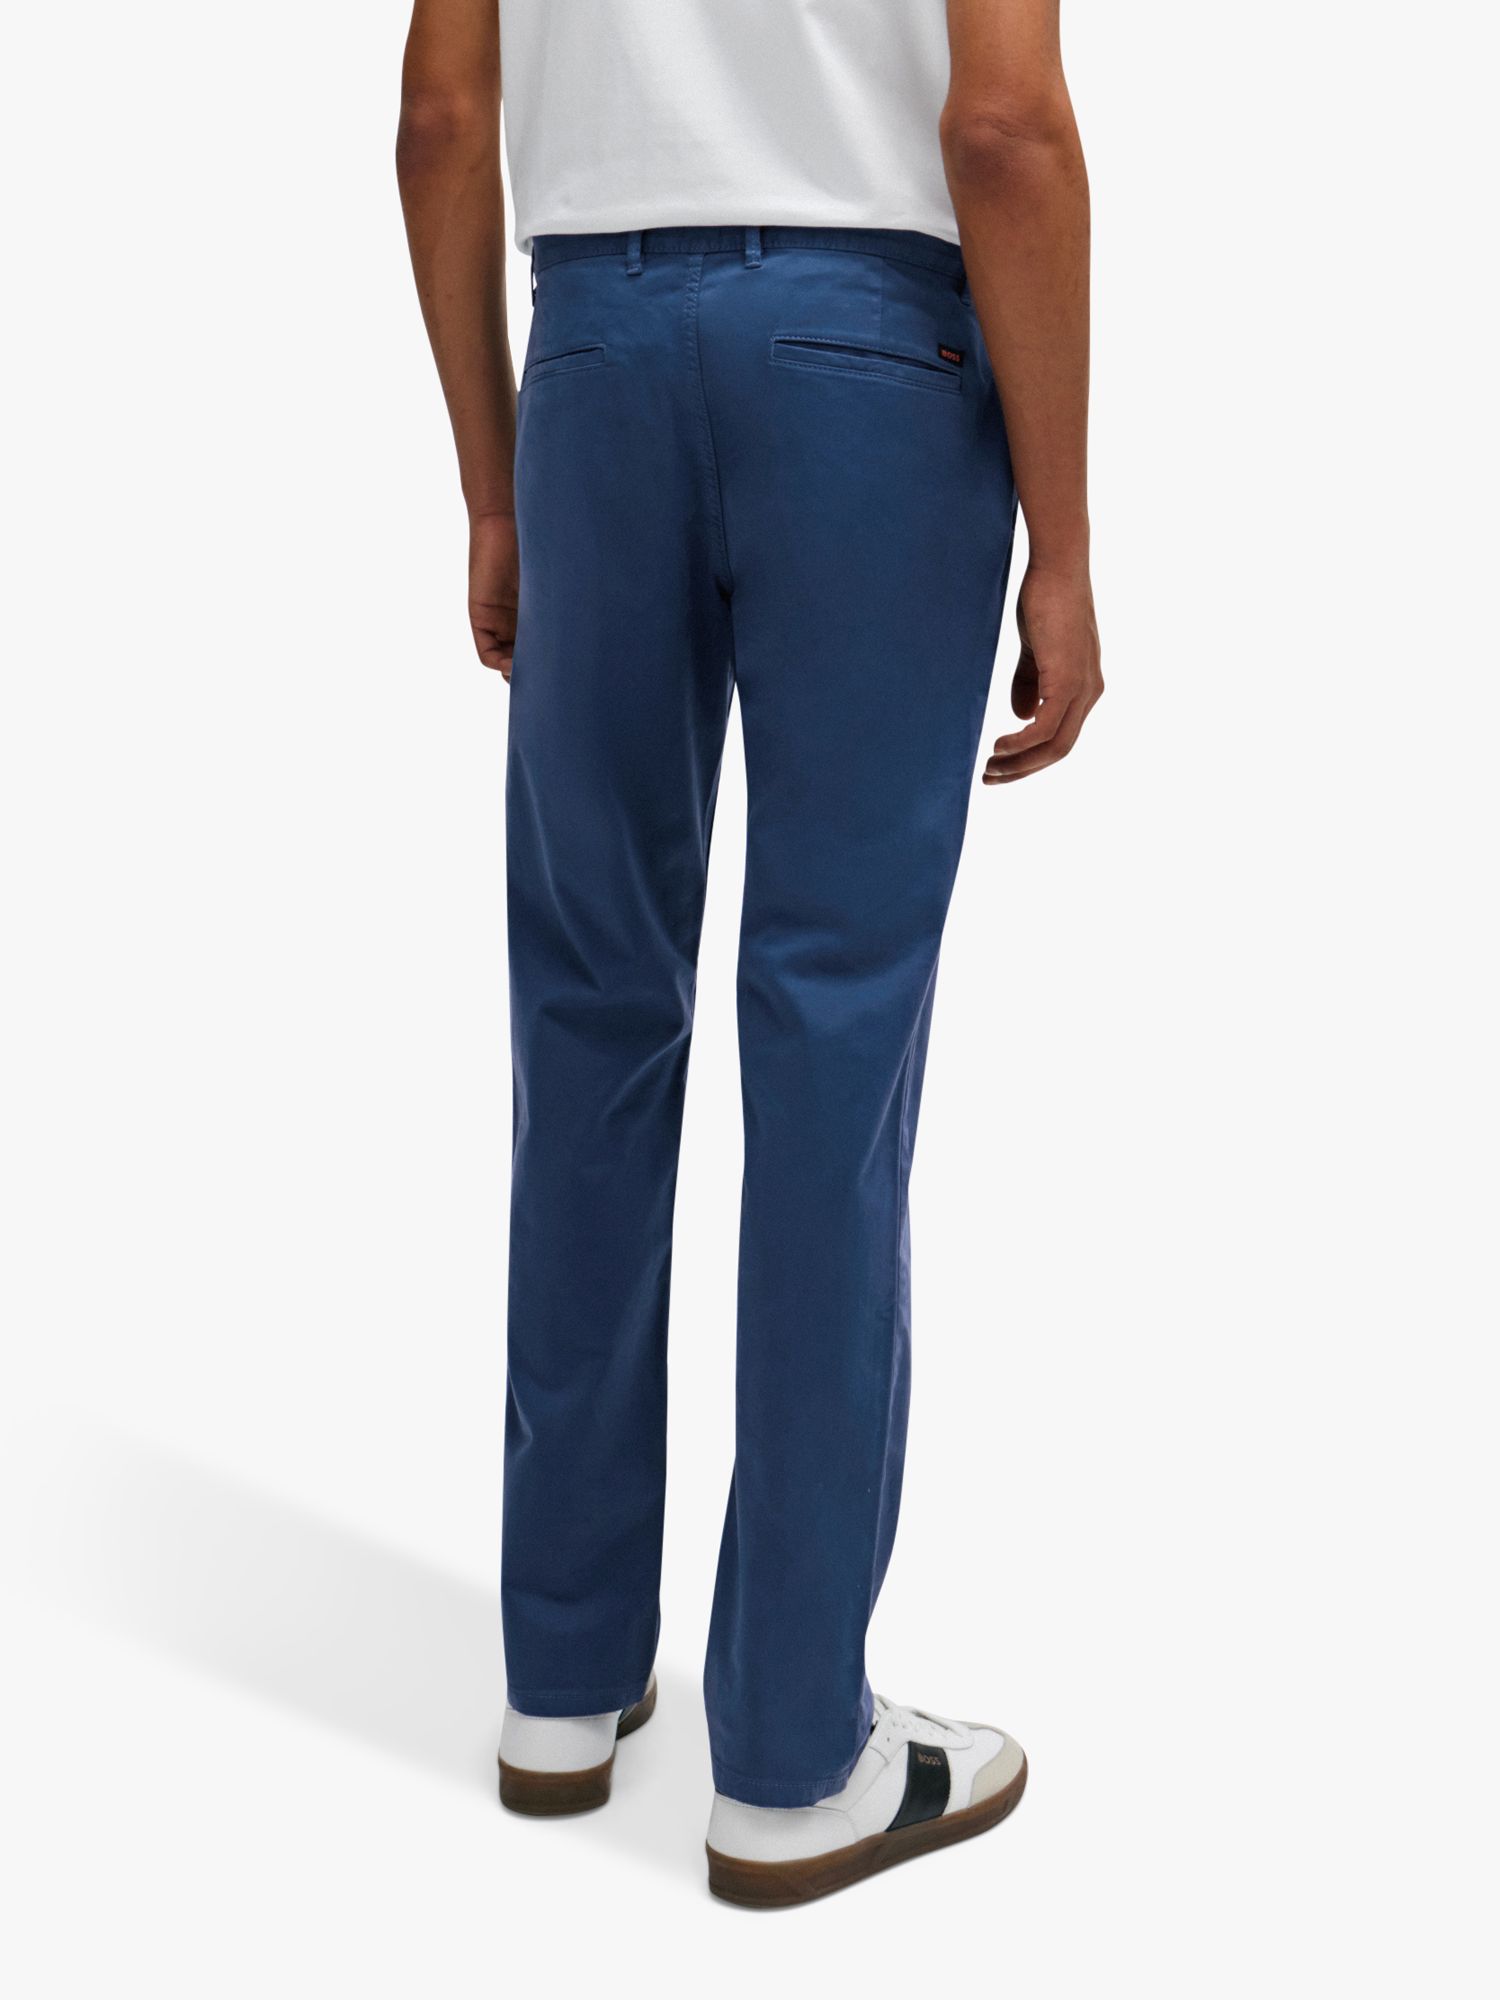 Buy BOSS Slim Fit Comfort Stretch Chinos, Navy Online at johnlewis.com